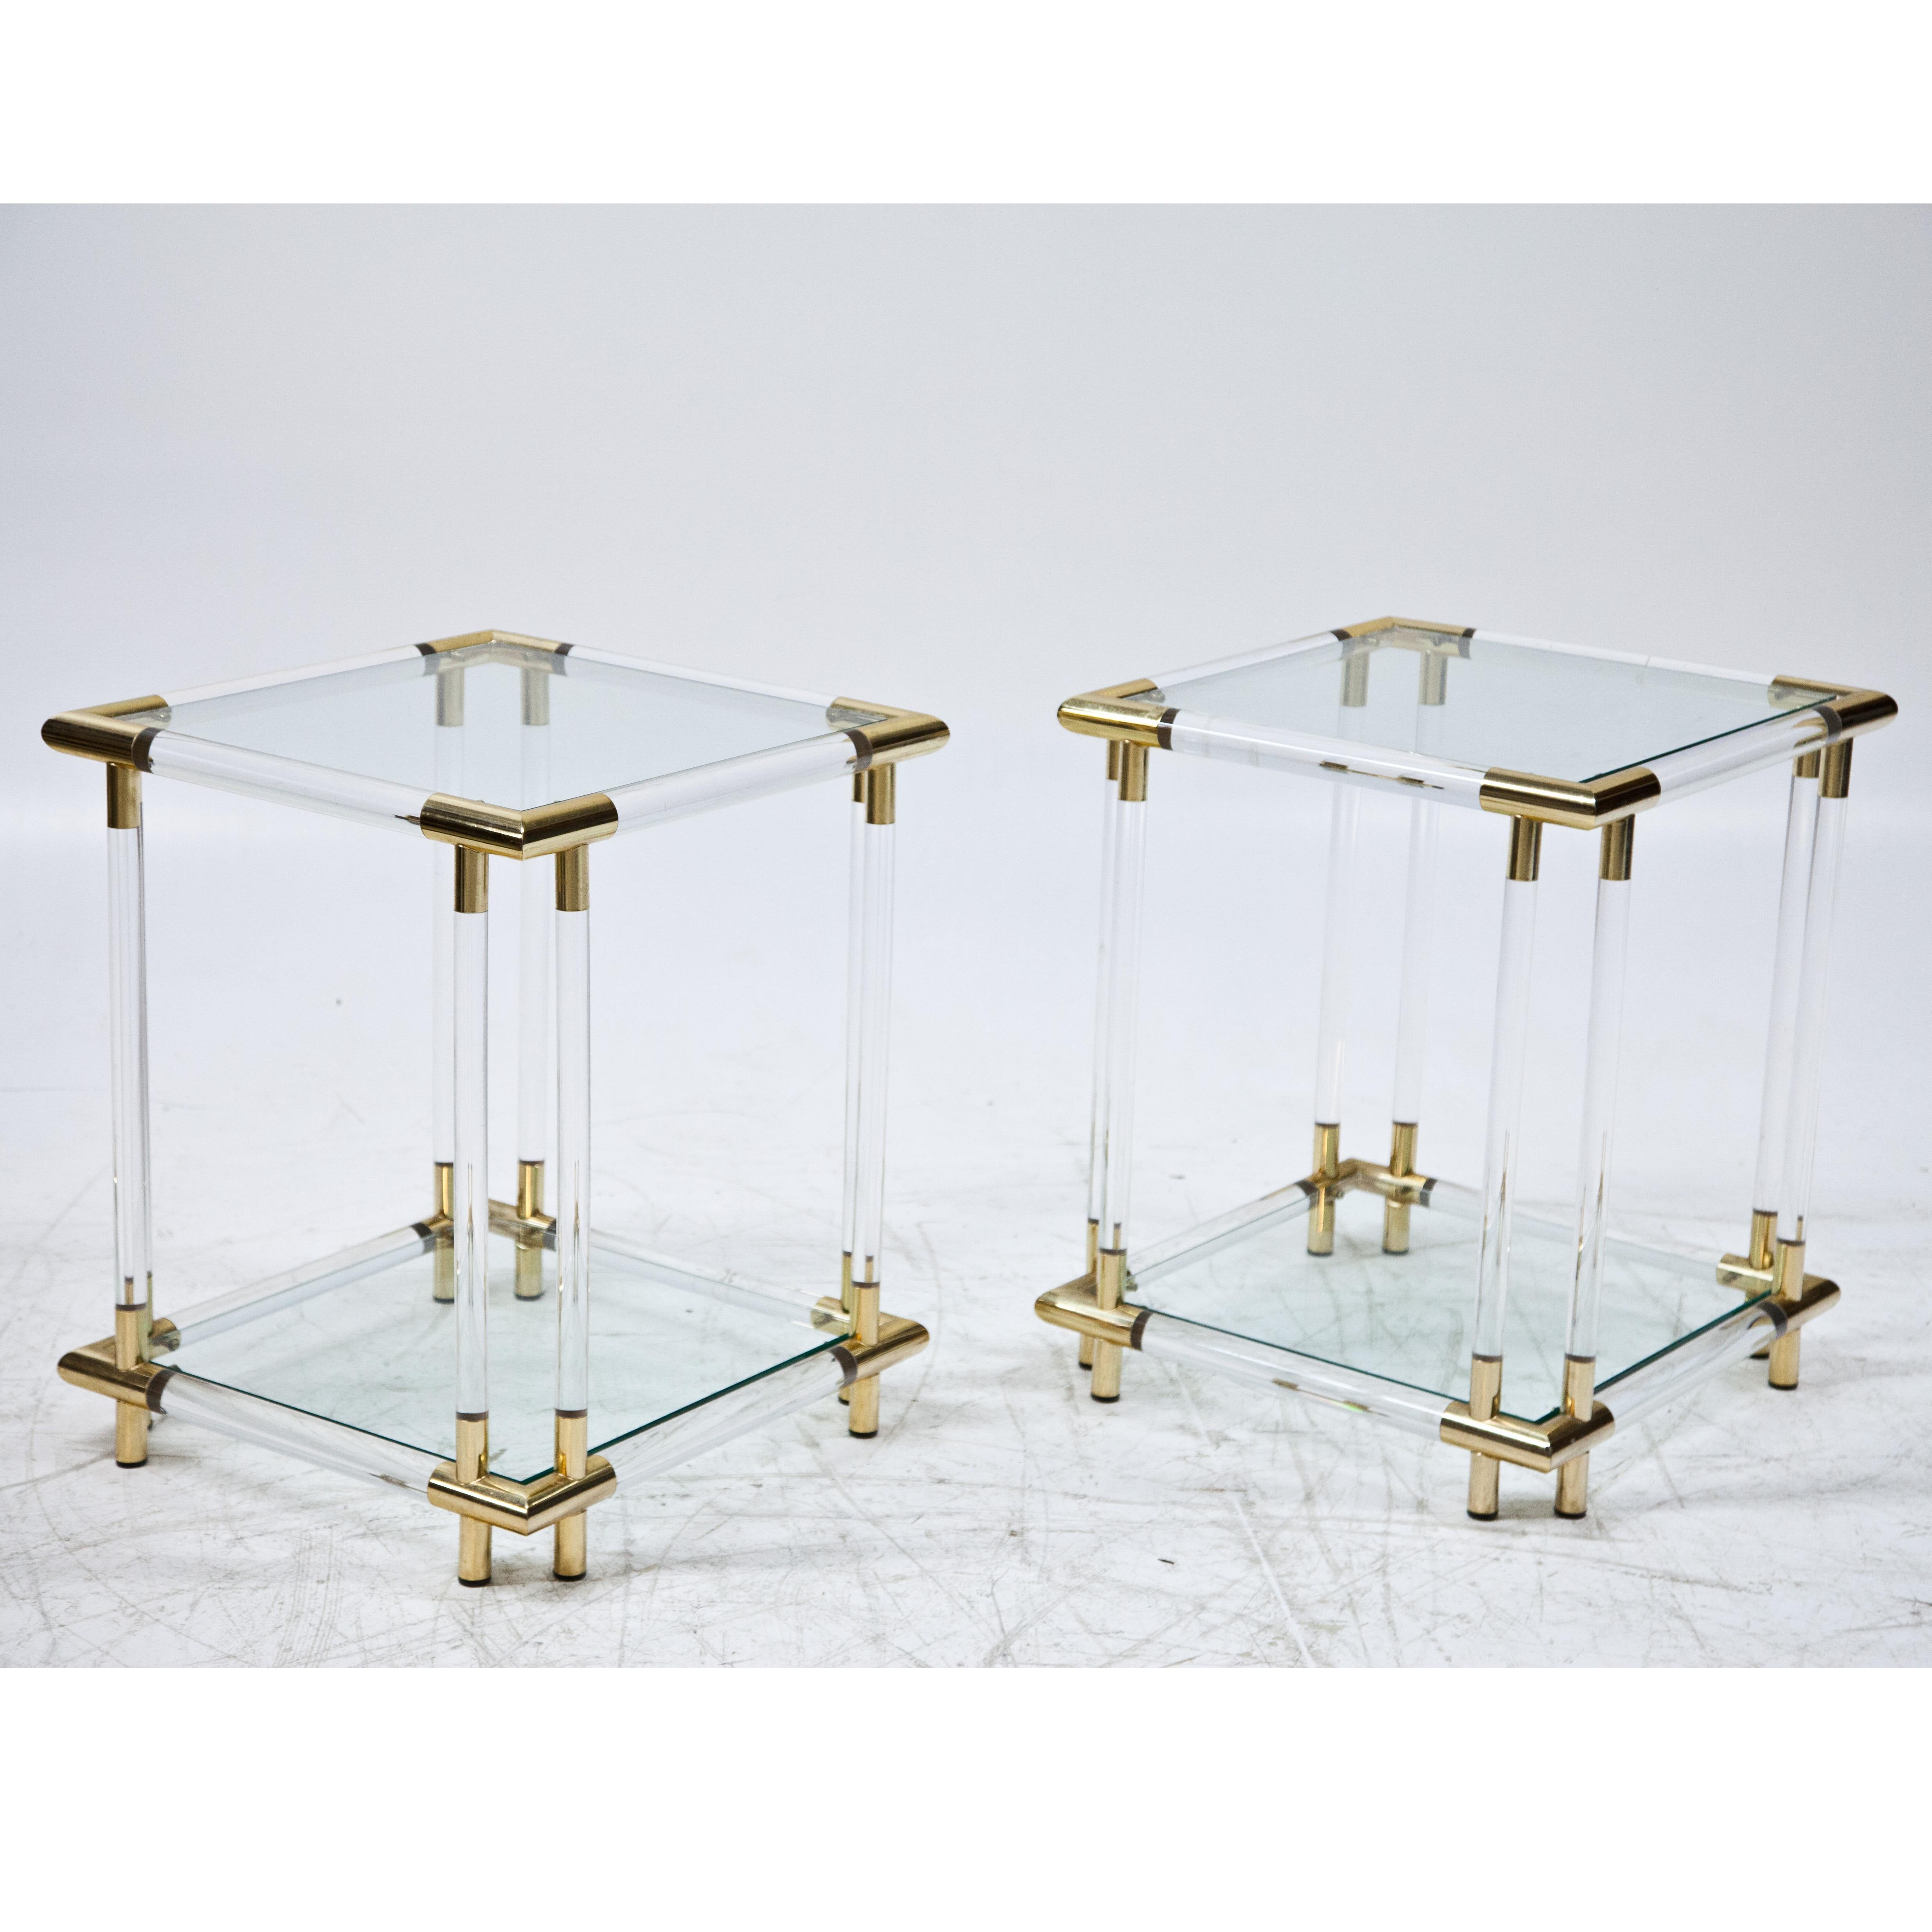 Pair of side tables Lucite and glass with brass accents.